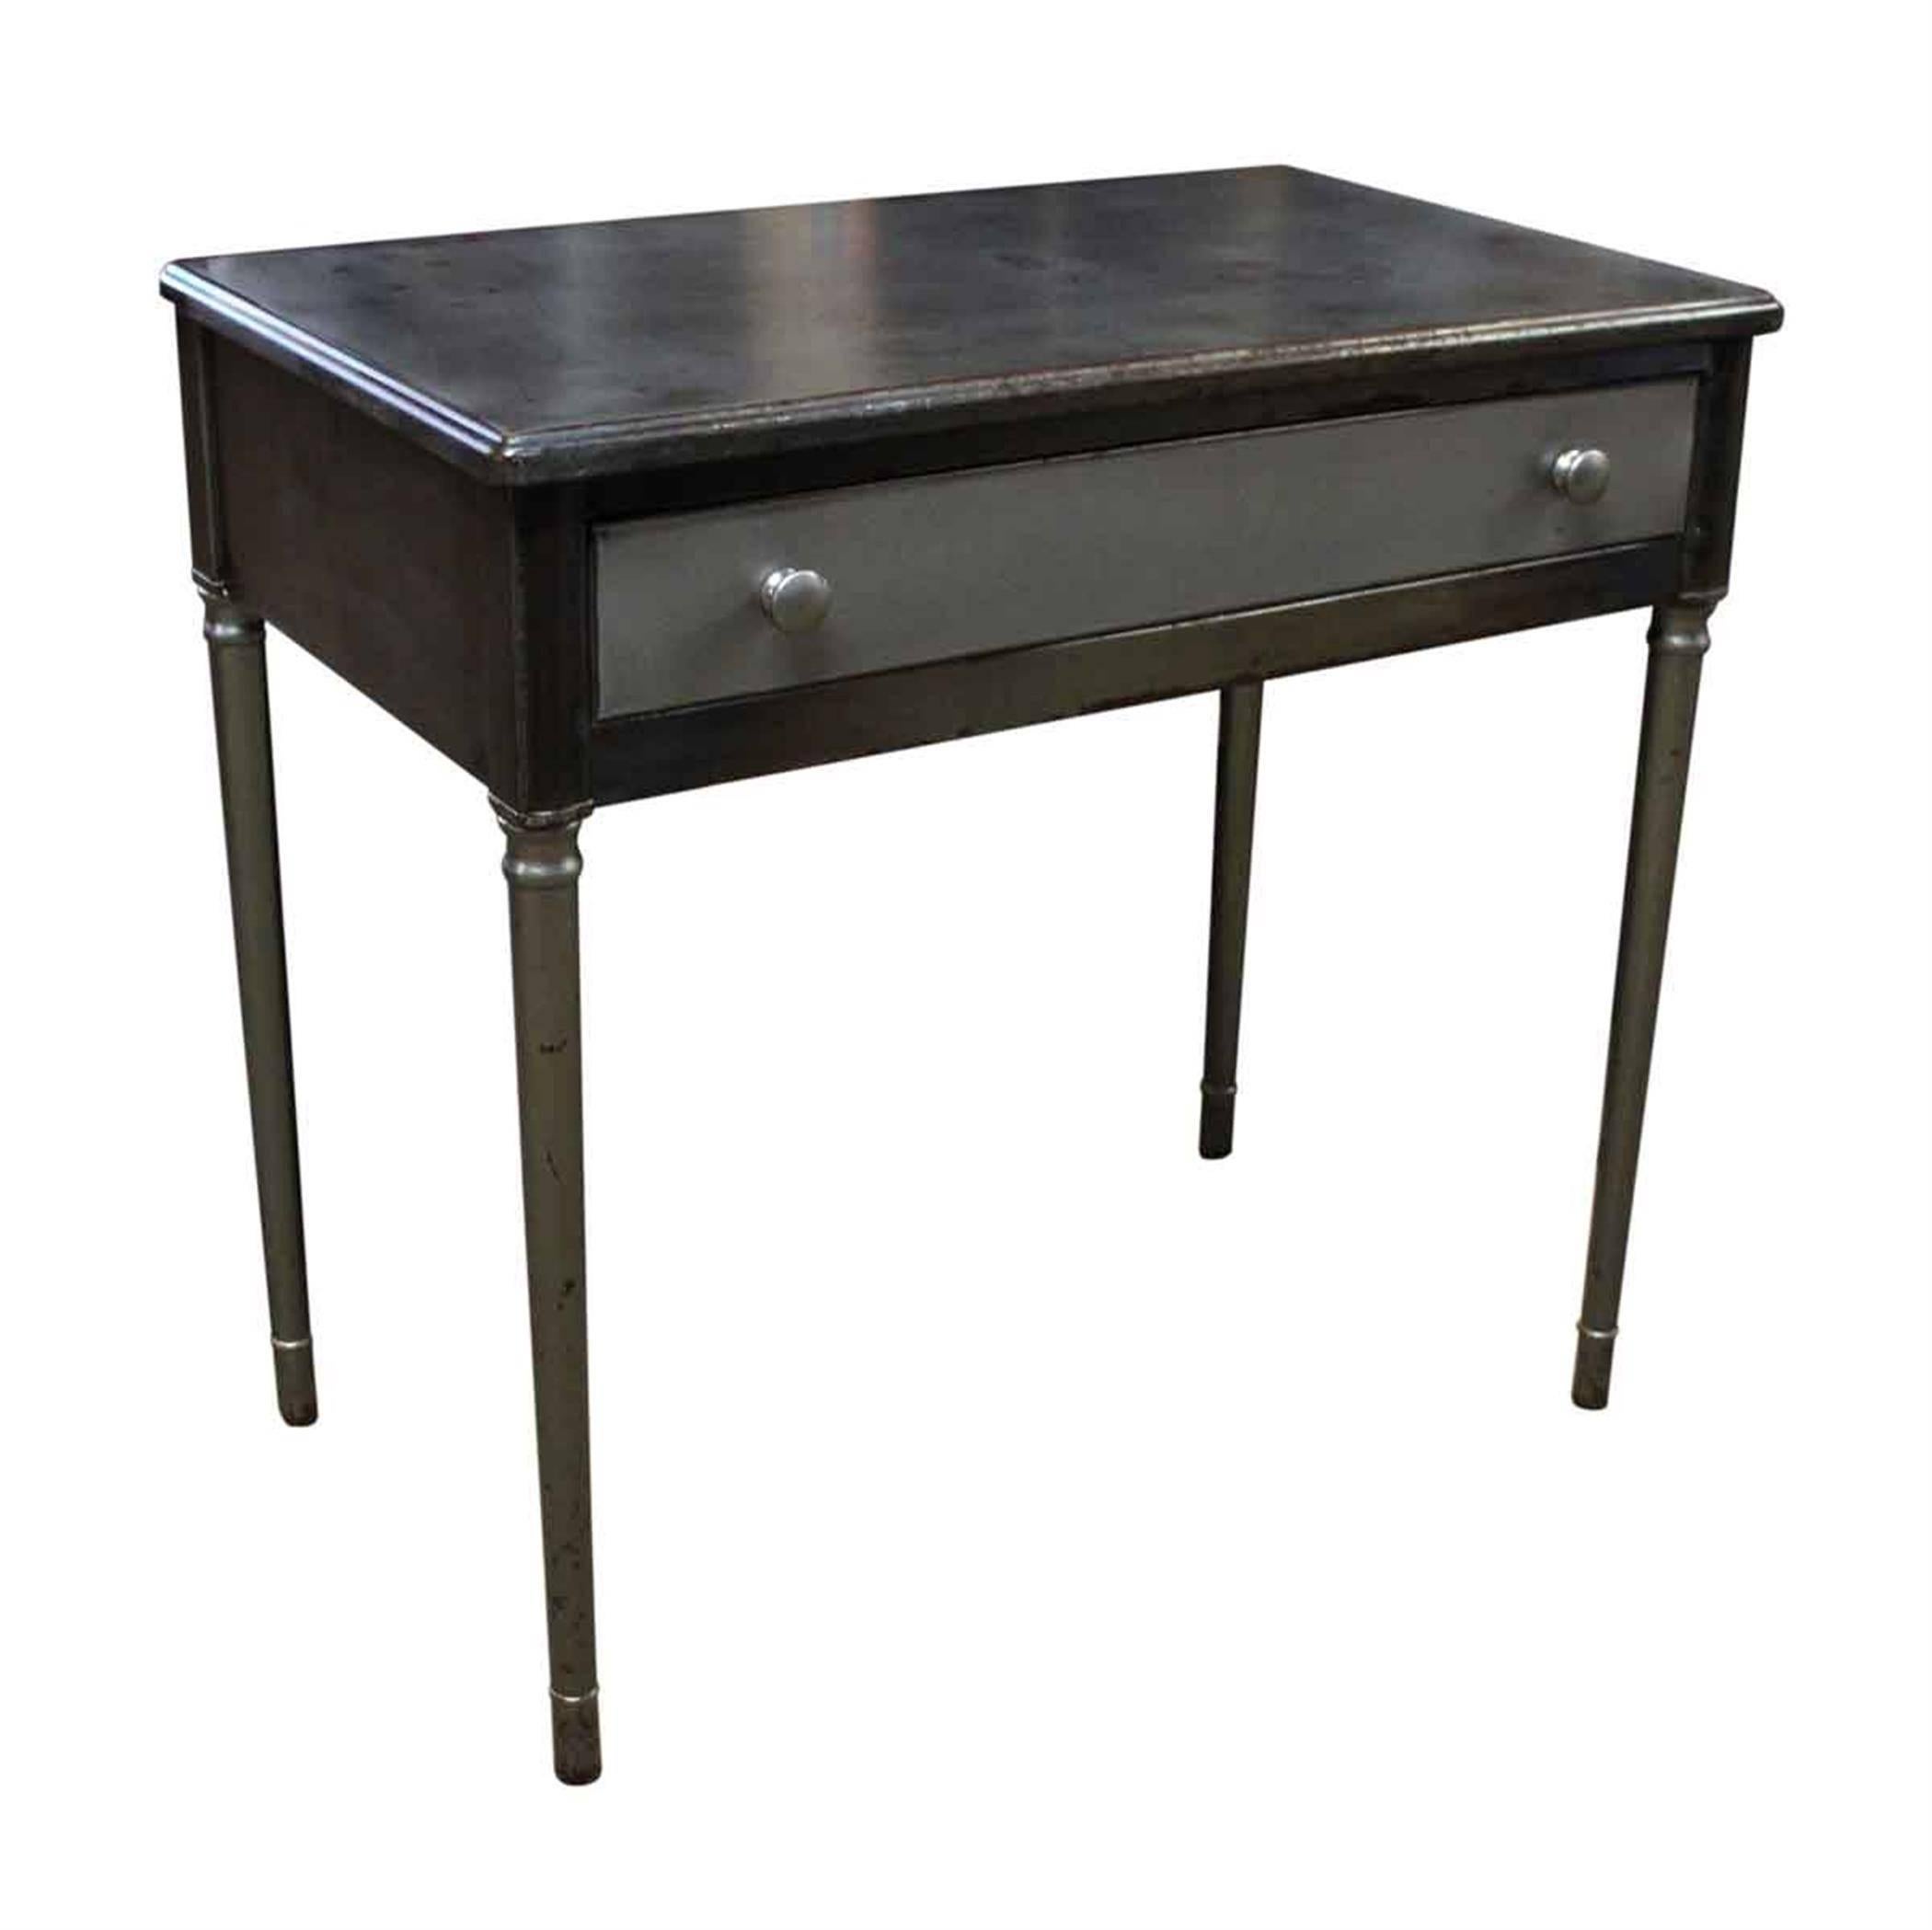 1930s Refinished Steel Industrial Desk with One Drawer